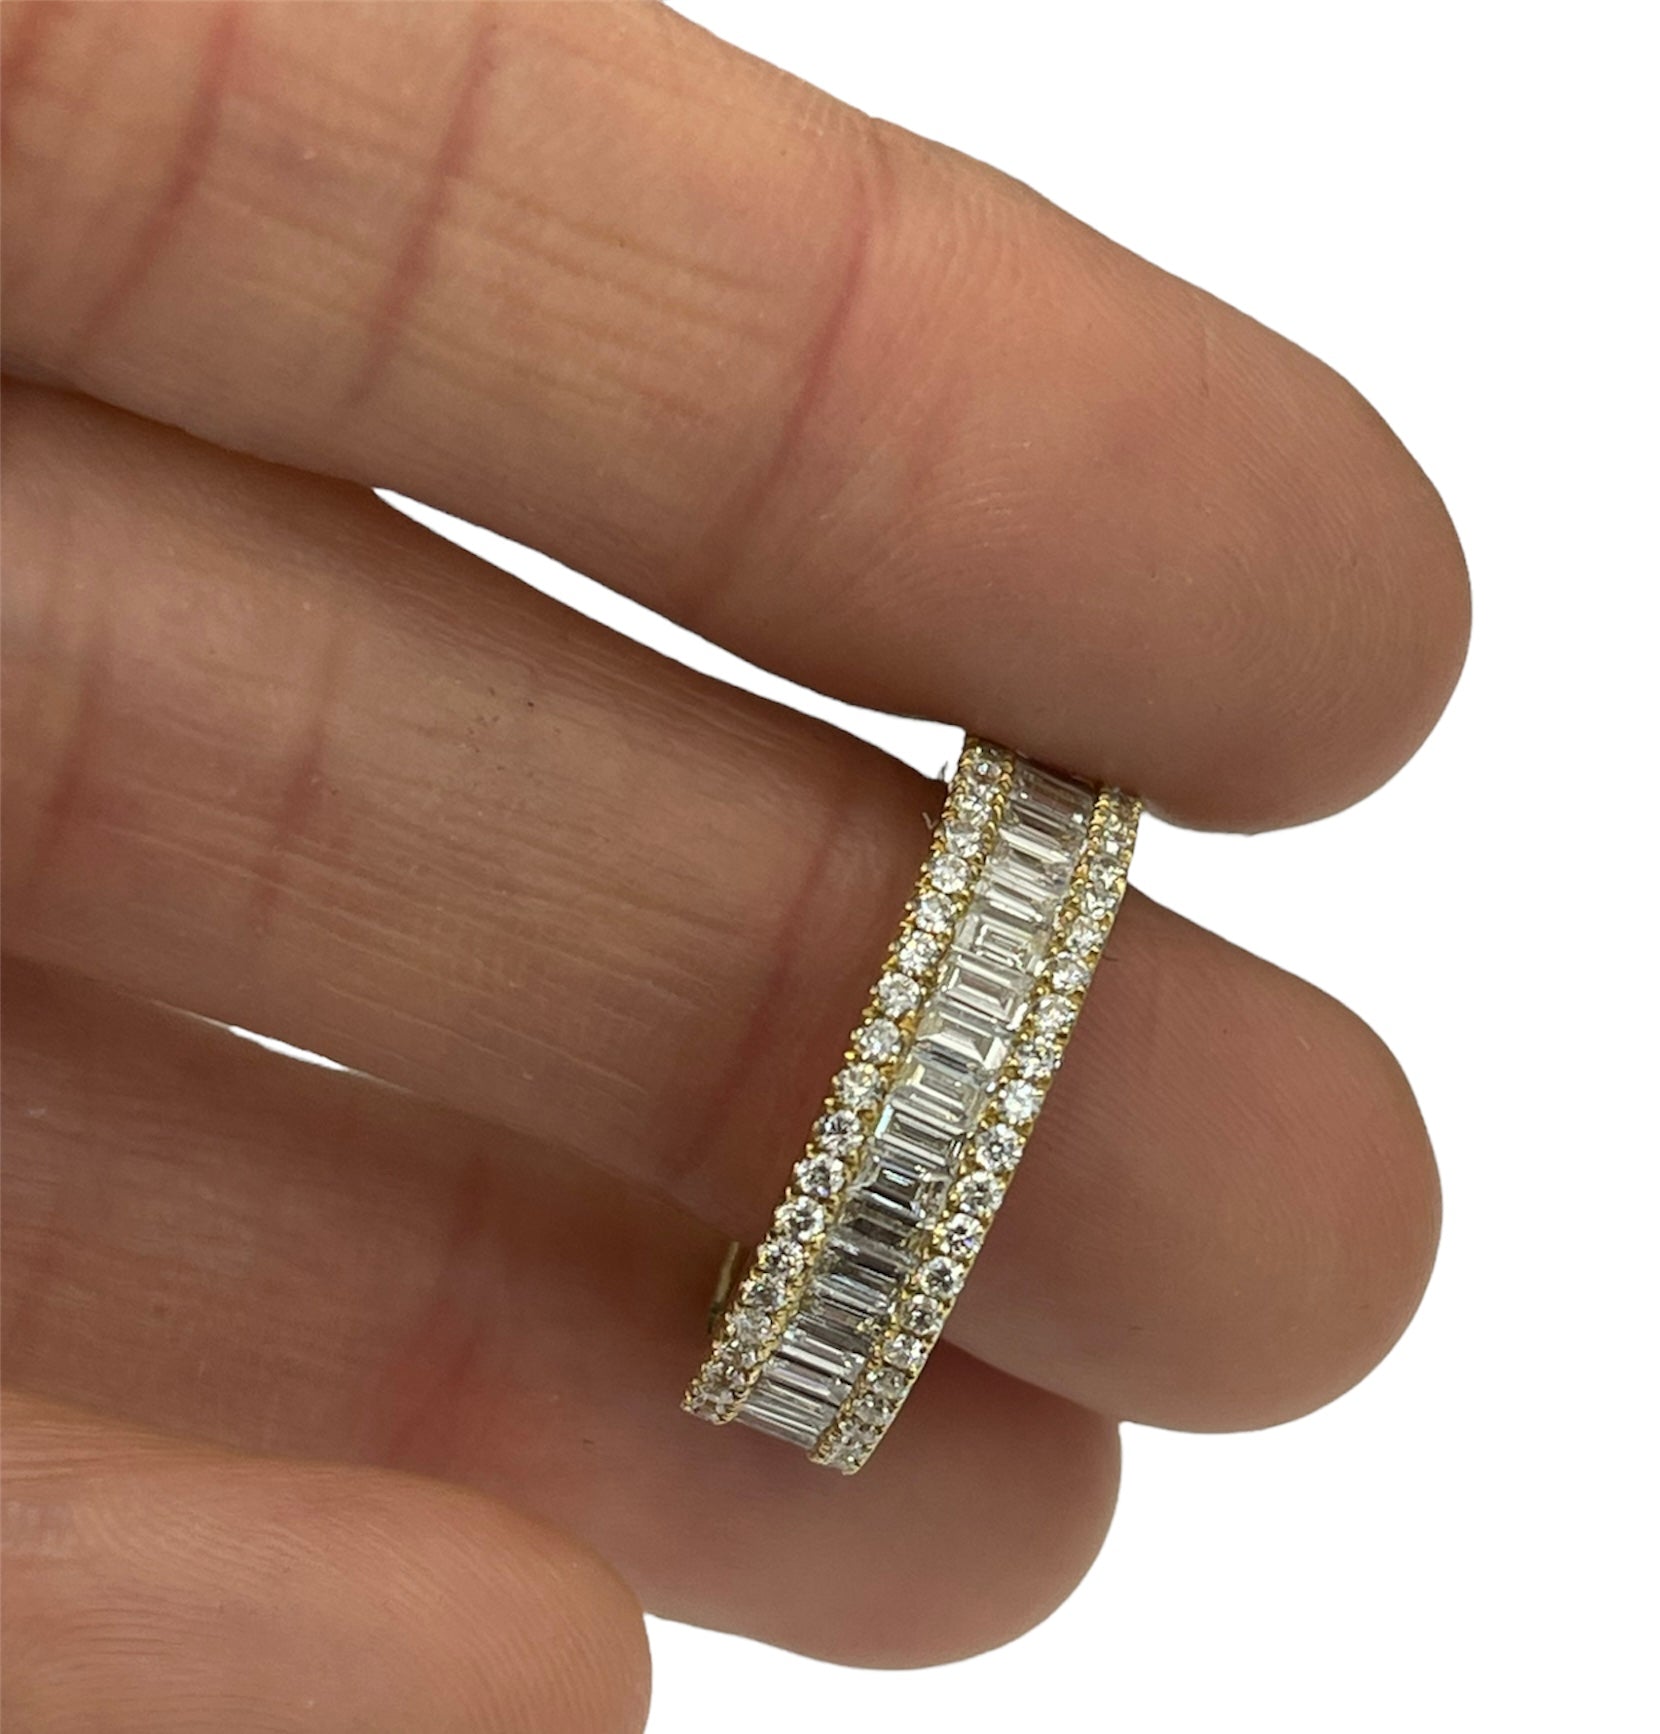 Baguette Eternity Diamond Ring Yellow Gold 18kt Size 6.5